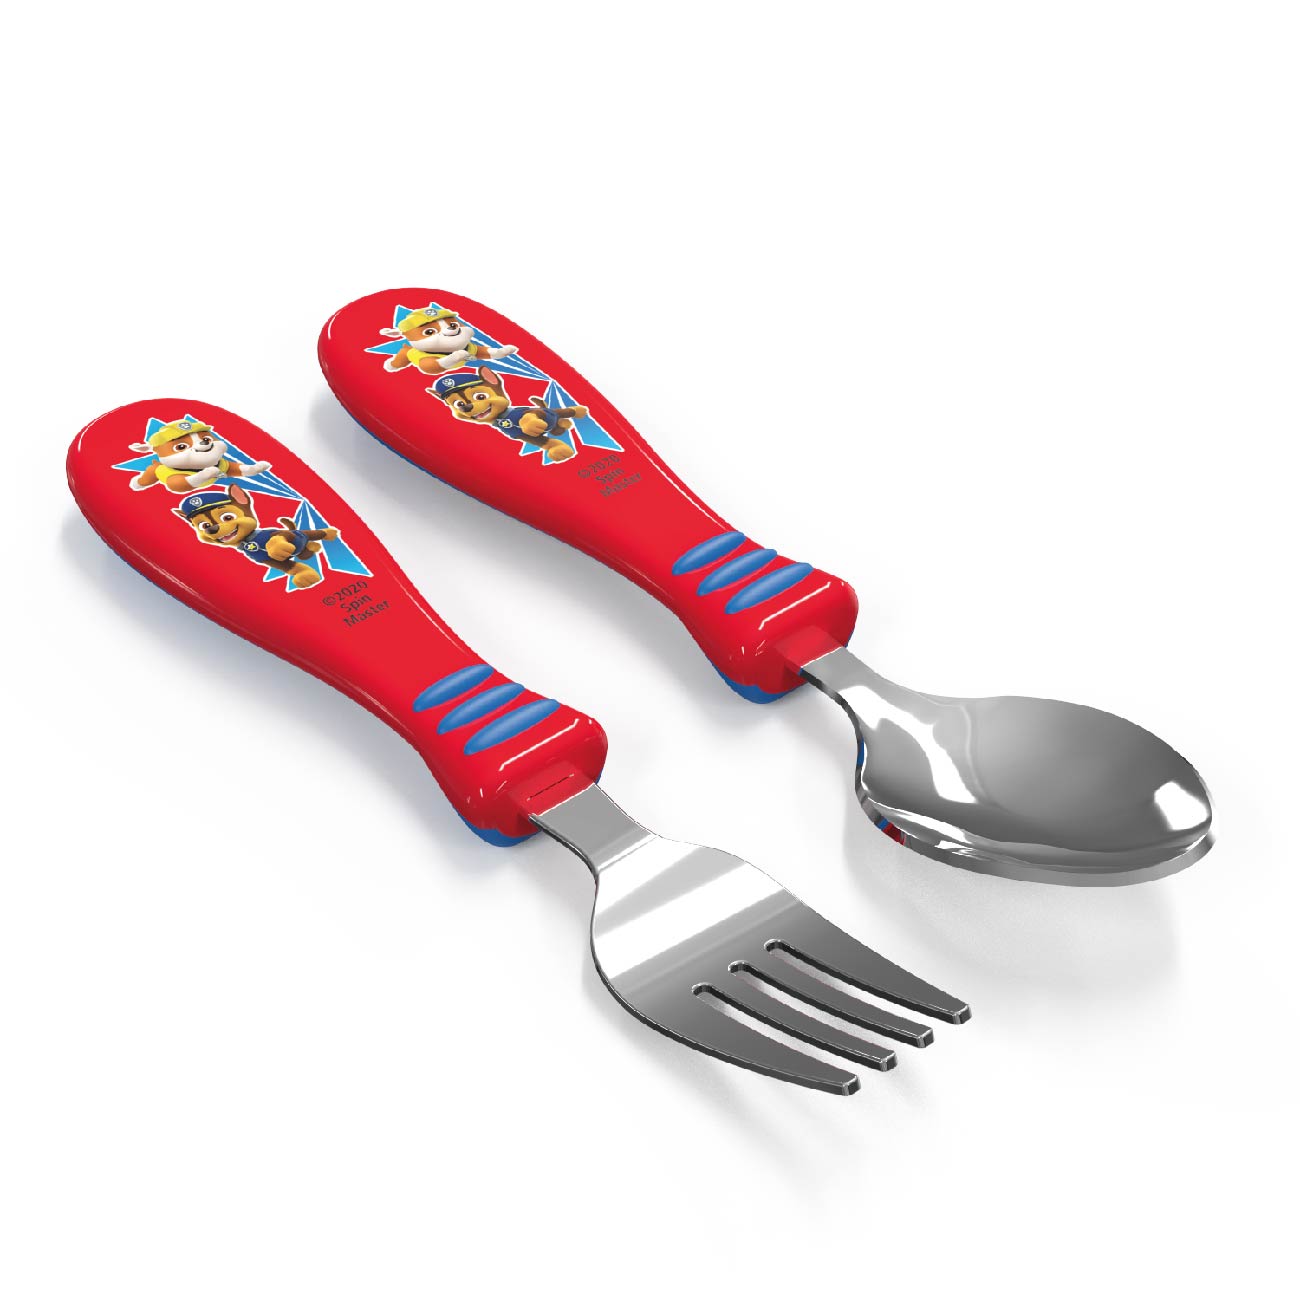 Paw Patrol Kid’s Flatware, Chase and Rubble, 2-piece set slideshow image 4